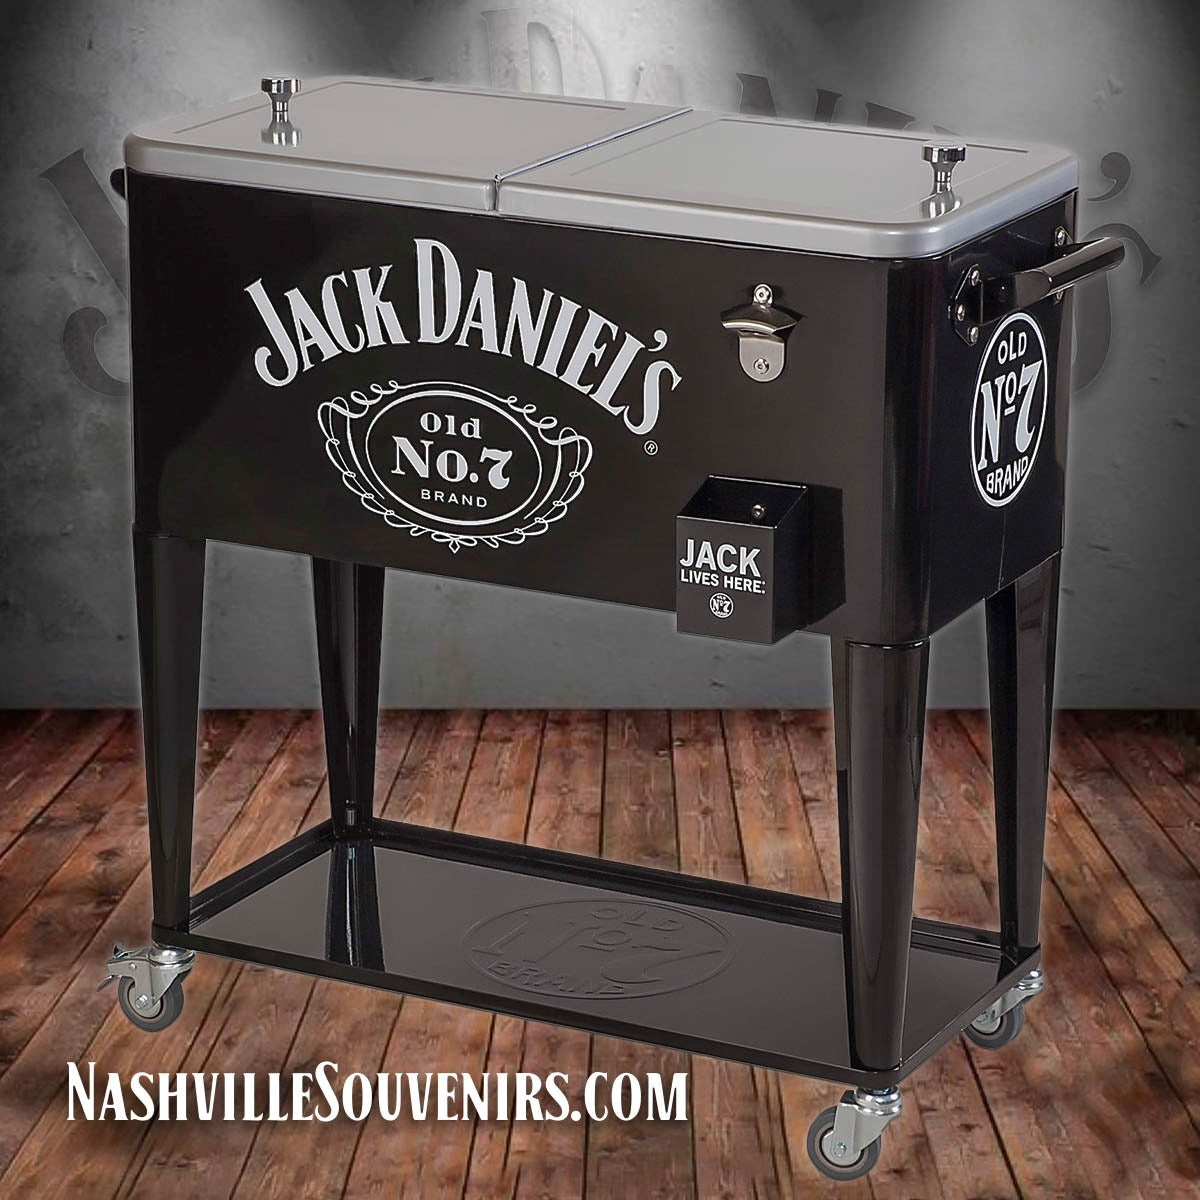 Get ready for summer, tailgating and all other fun events. This Jack Daniel's rolling cooler is the perfect companion for keeping all sorts of your favorite beverages chilled and ready to go.